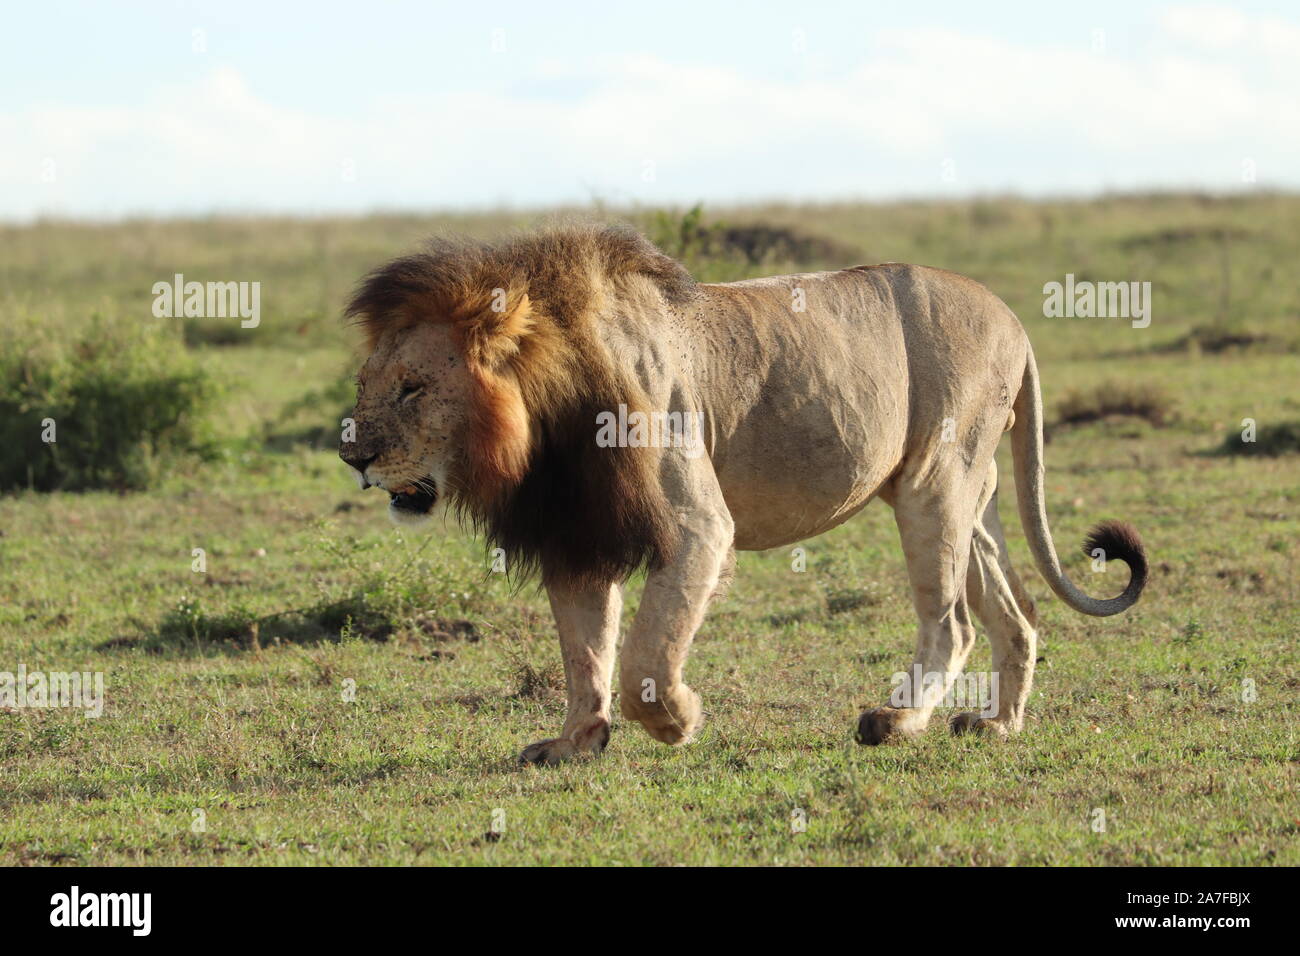 Lion in the african savannah Stock Photo - Alamy